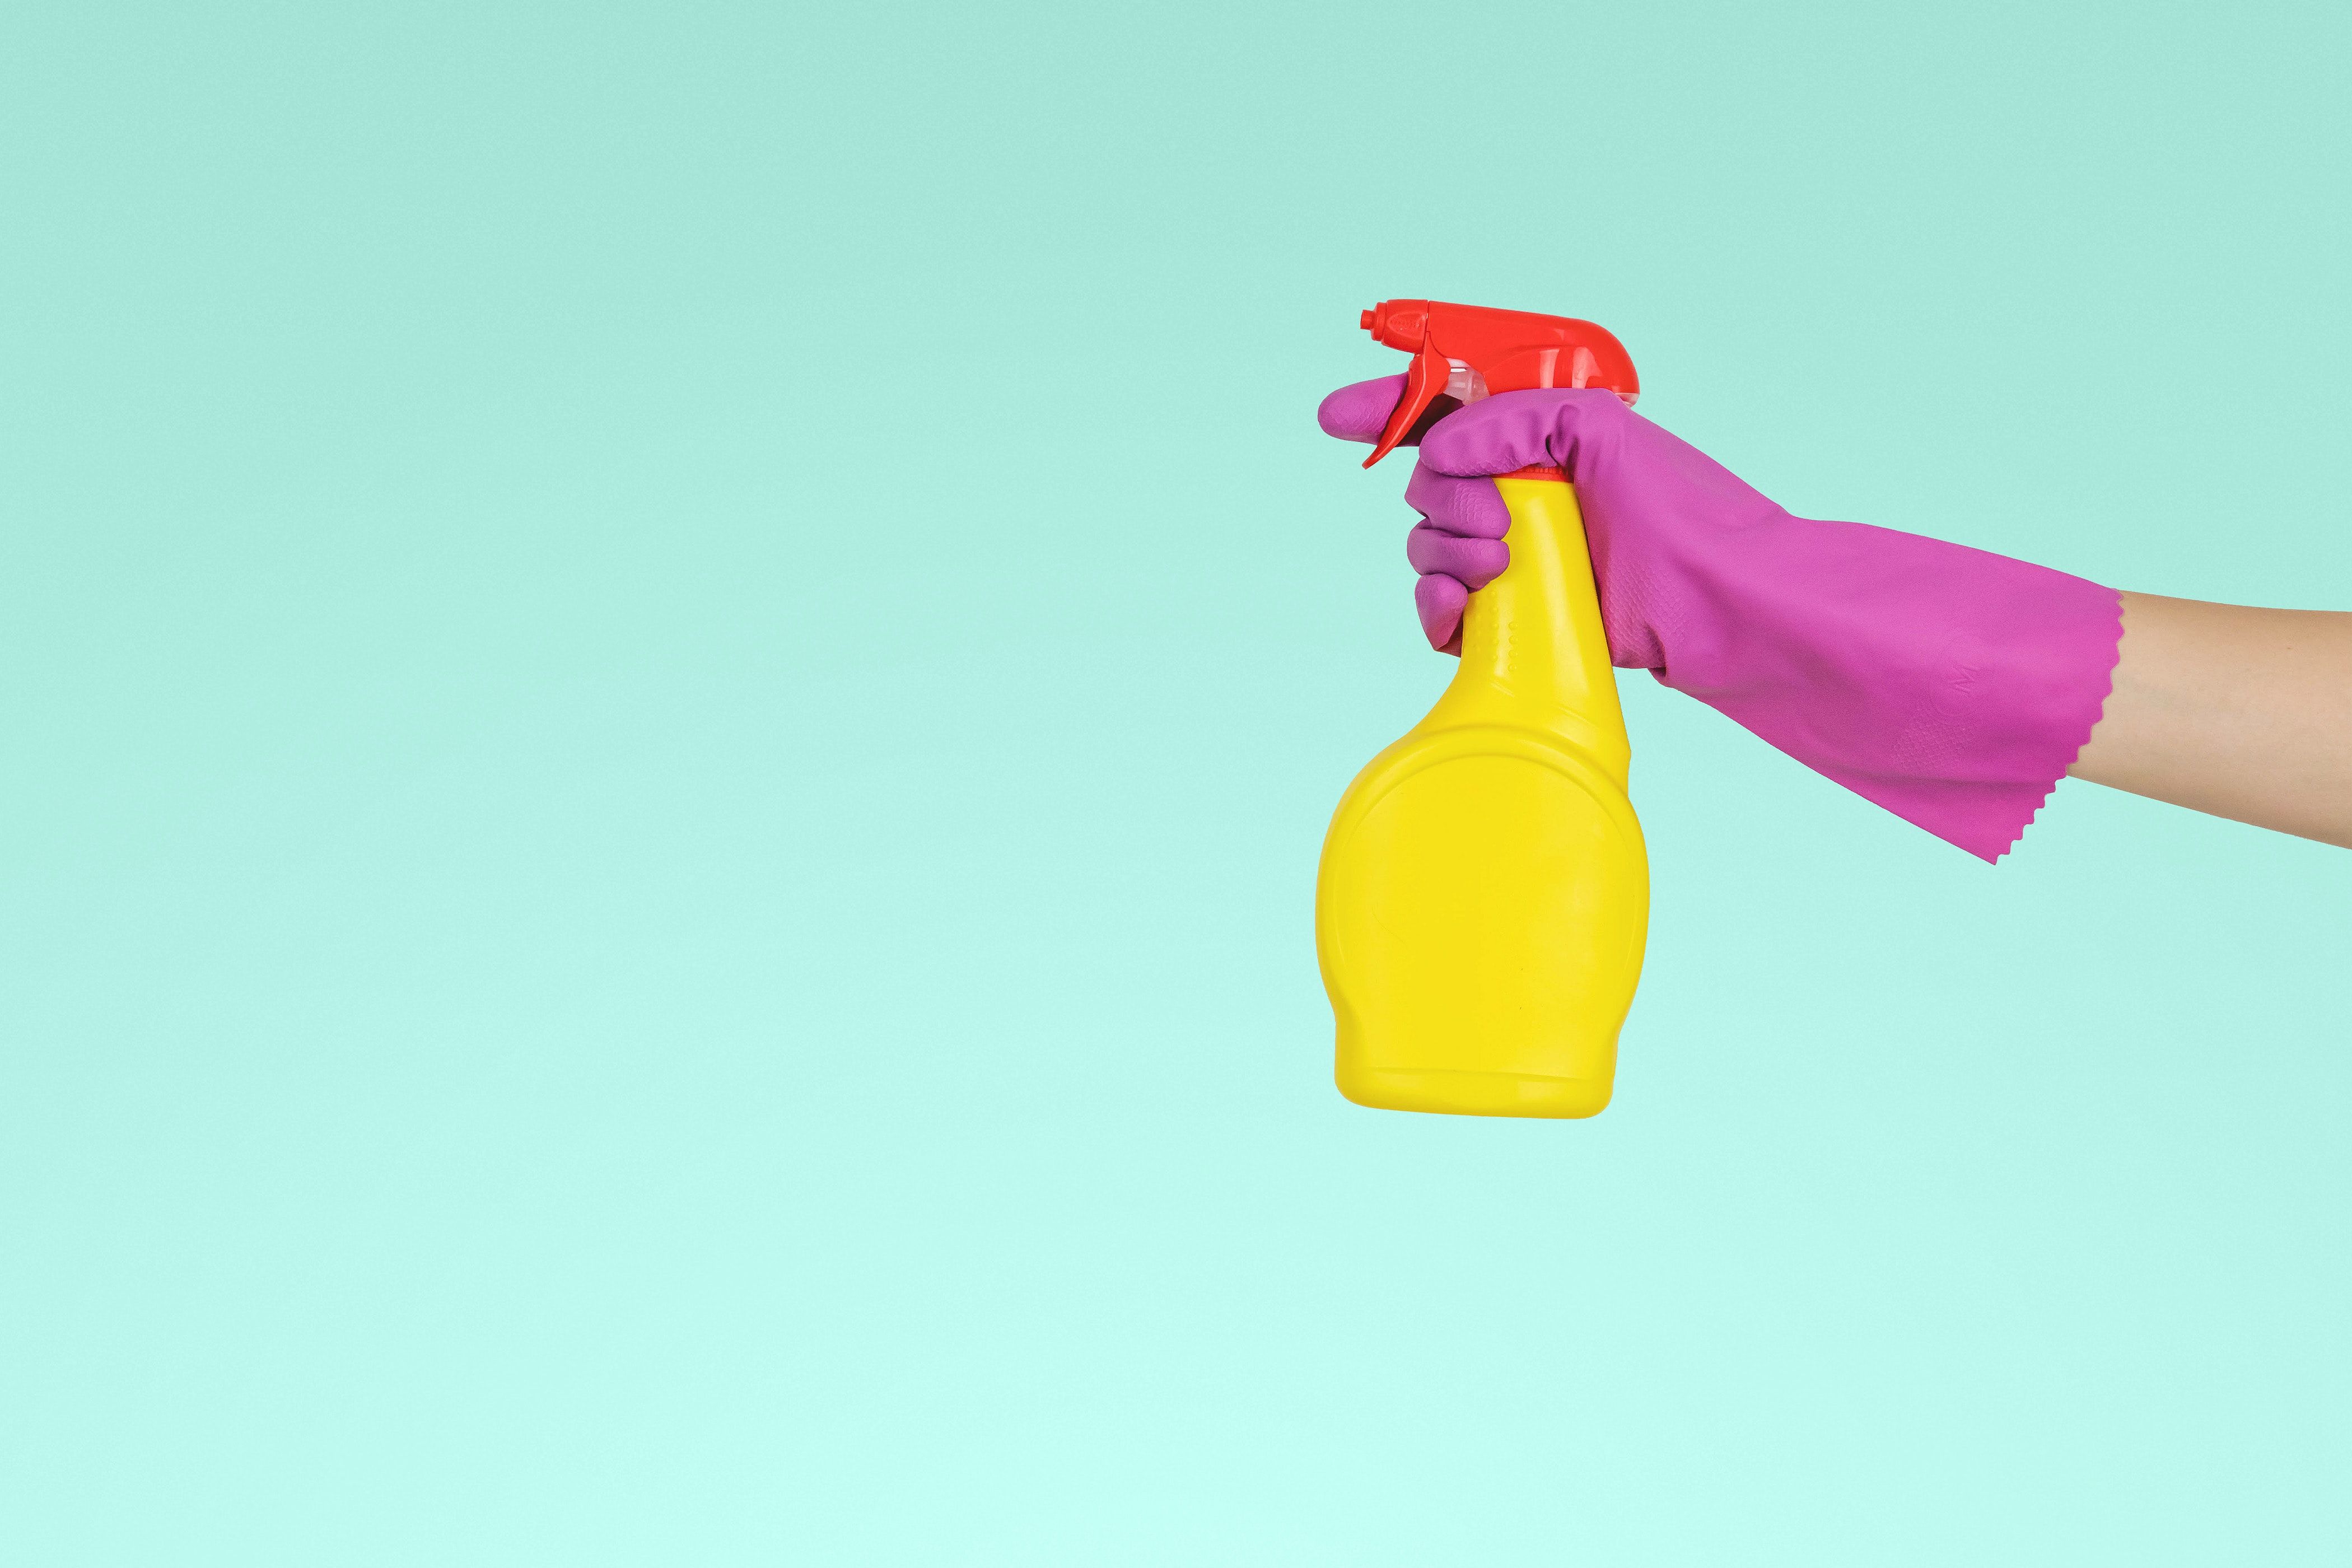 Hand in pink cleaning glove holding yellow cleaning spray